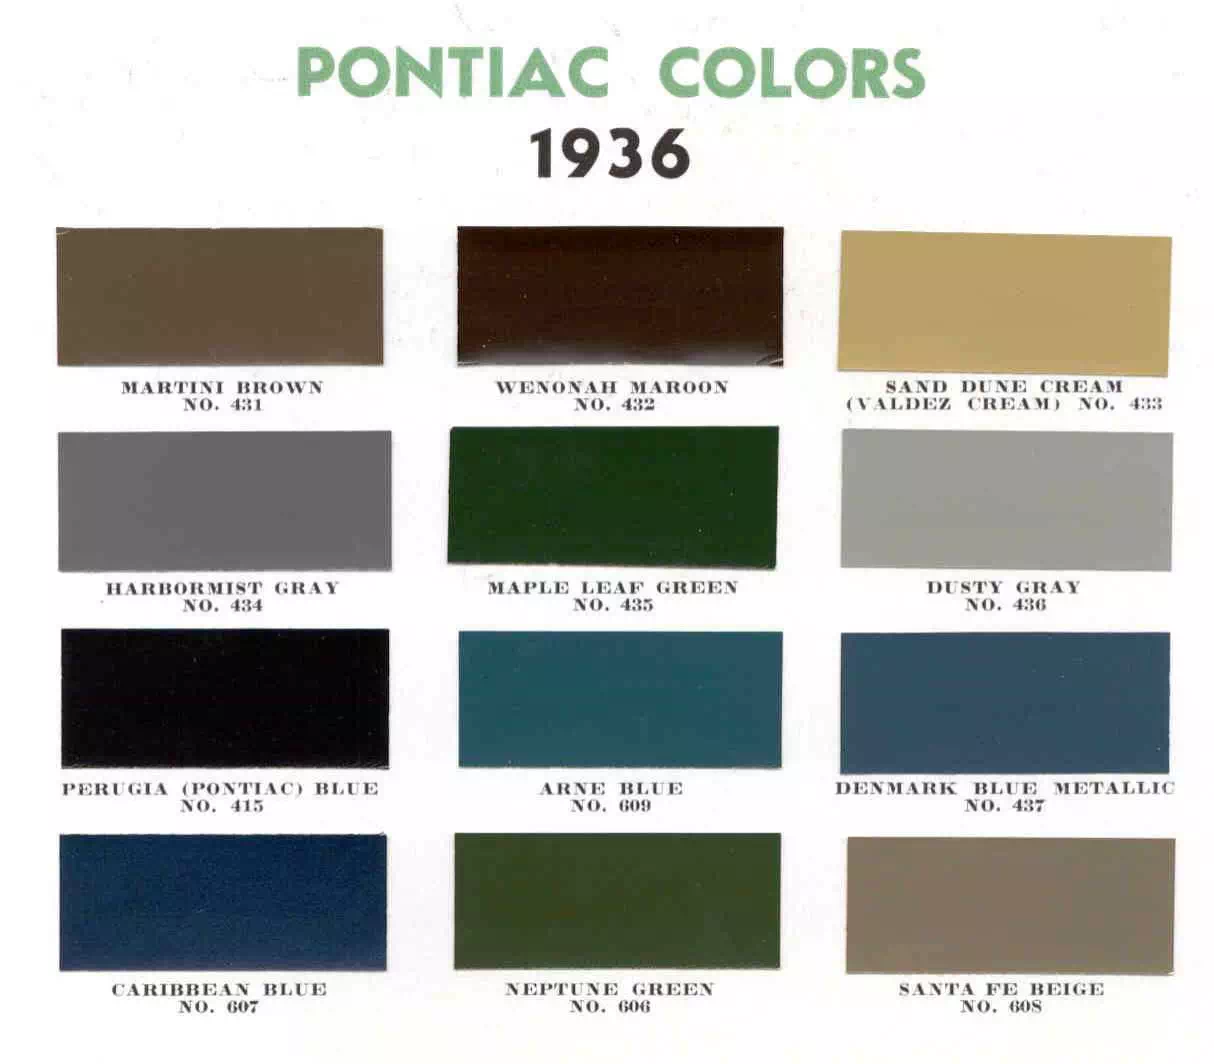 Colors and Codes used on the exterior of Pontiac Vehicles in 1936